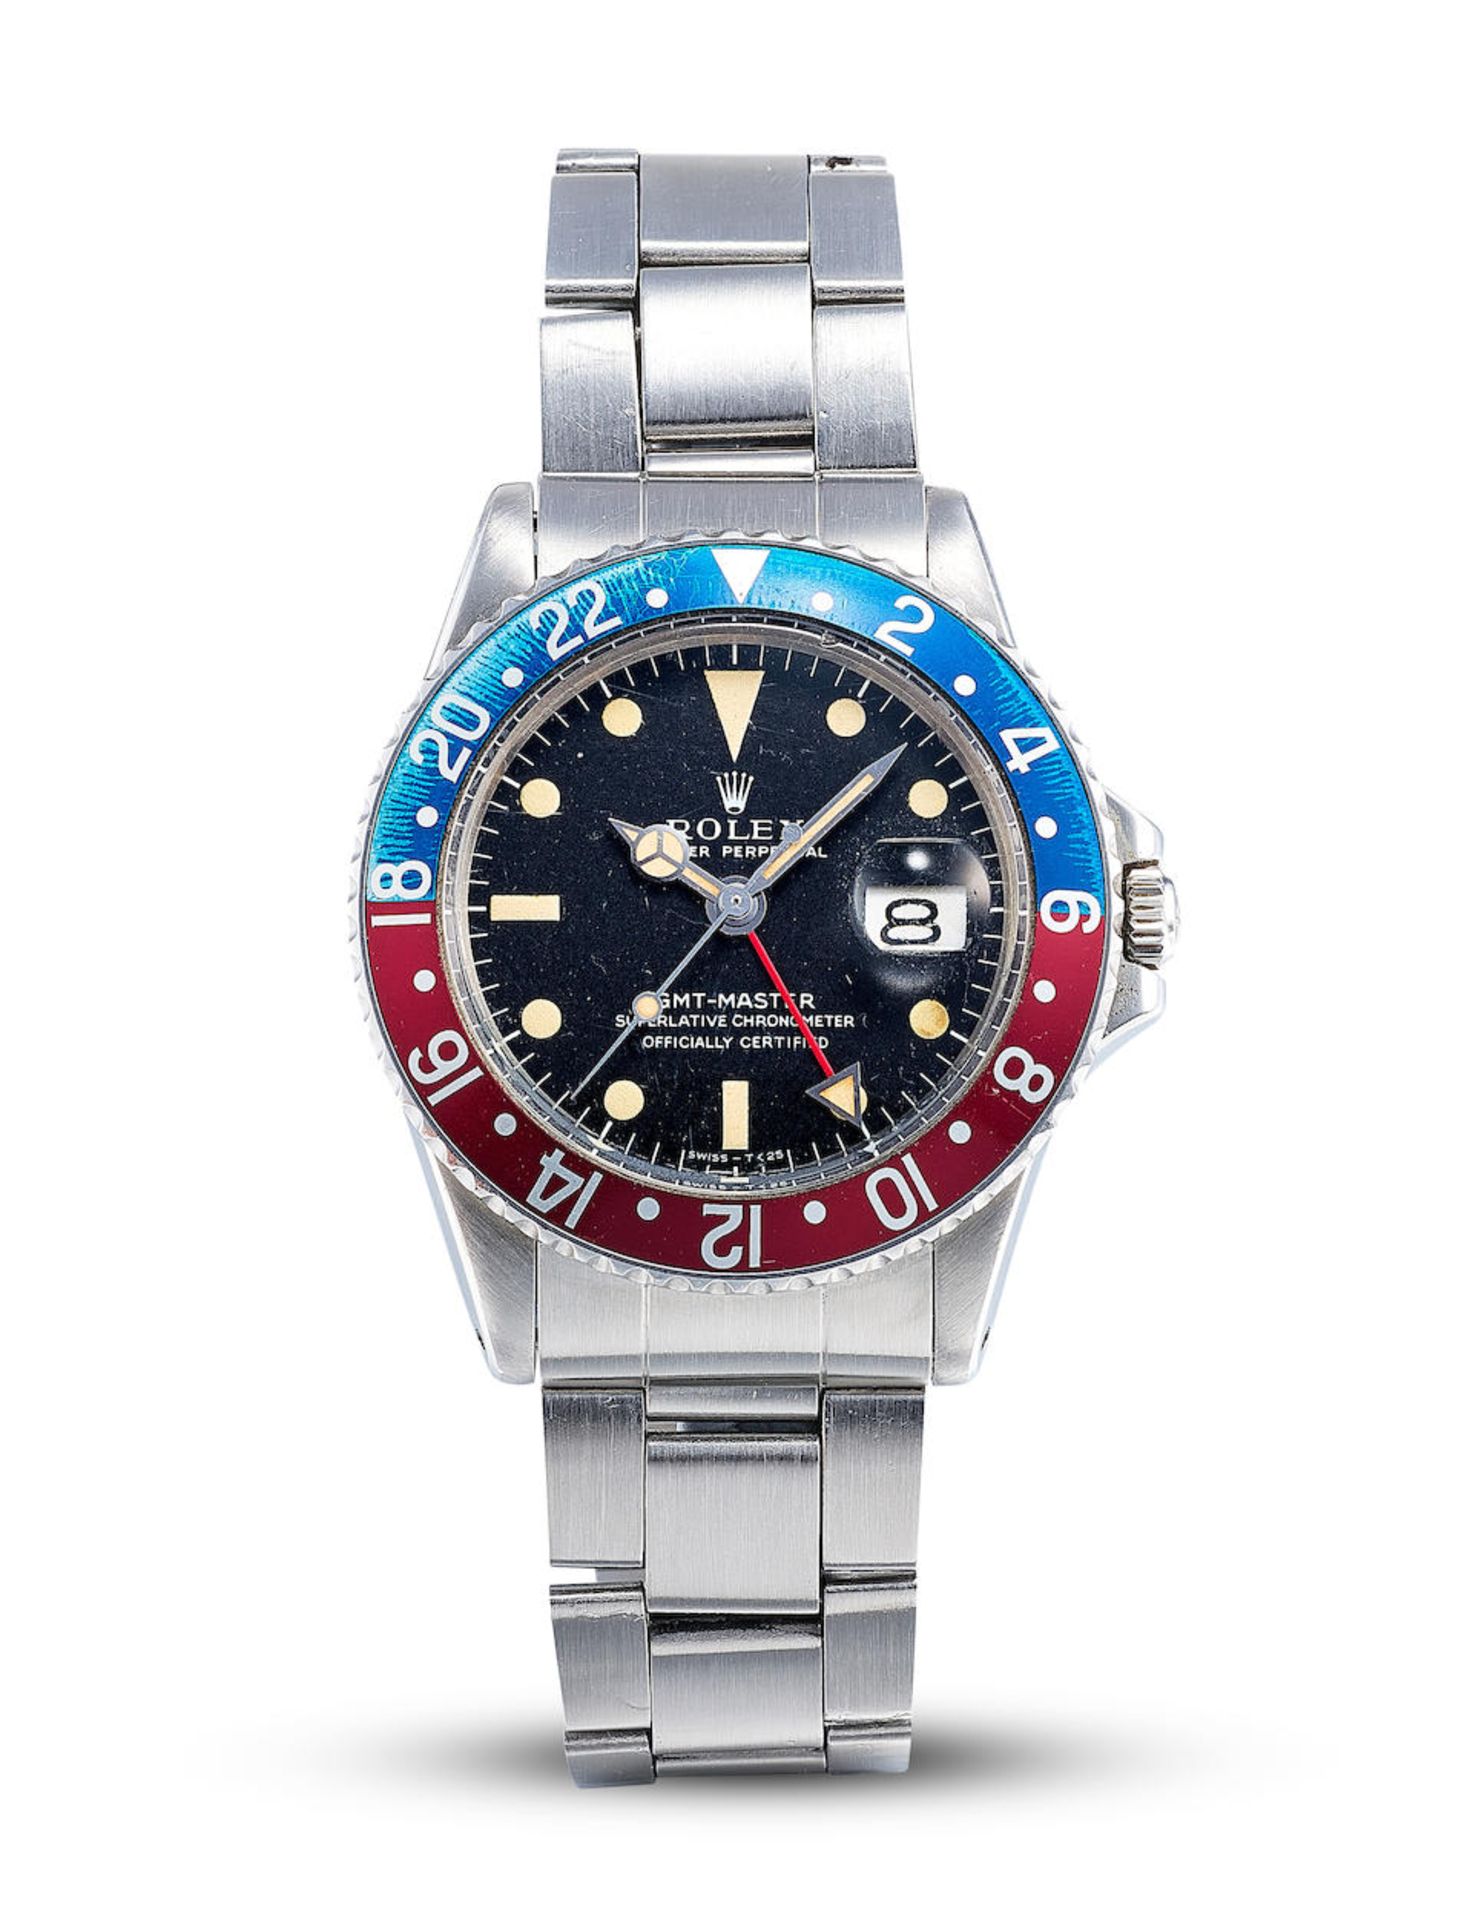 ROLEX | GMT-MASTER 'PEPSI' MARK 1 LONG E, REF.1675, A STAINLESS STEEL DUAL TIME BRACELET WATCH W...